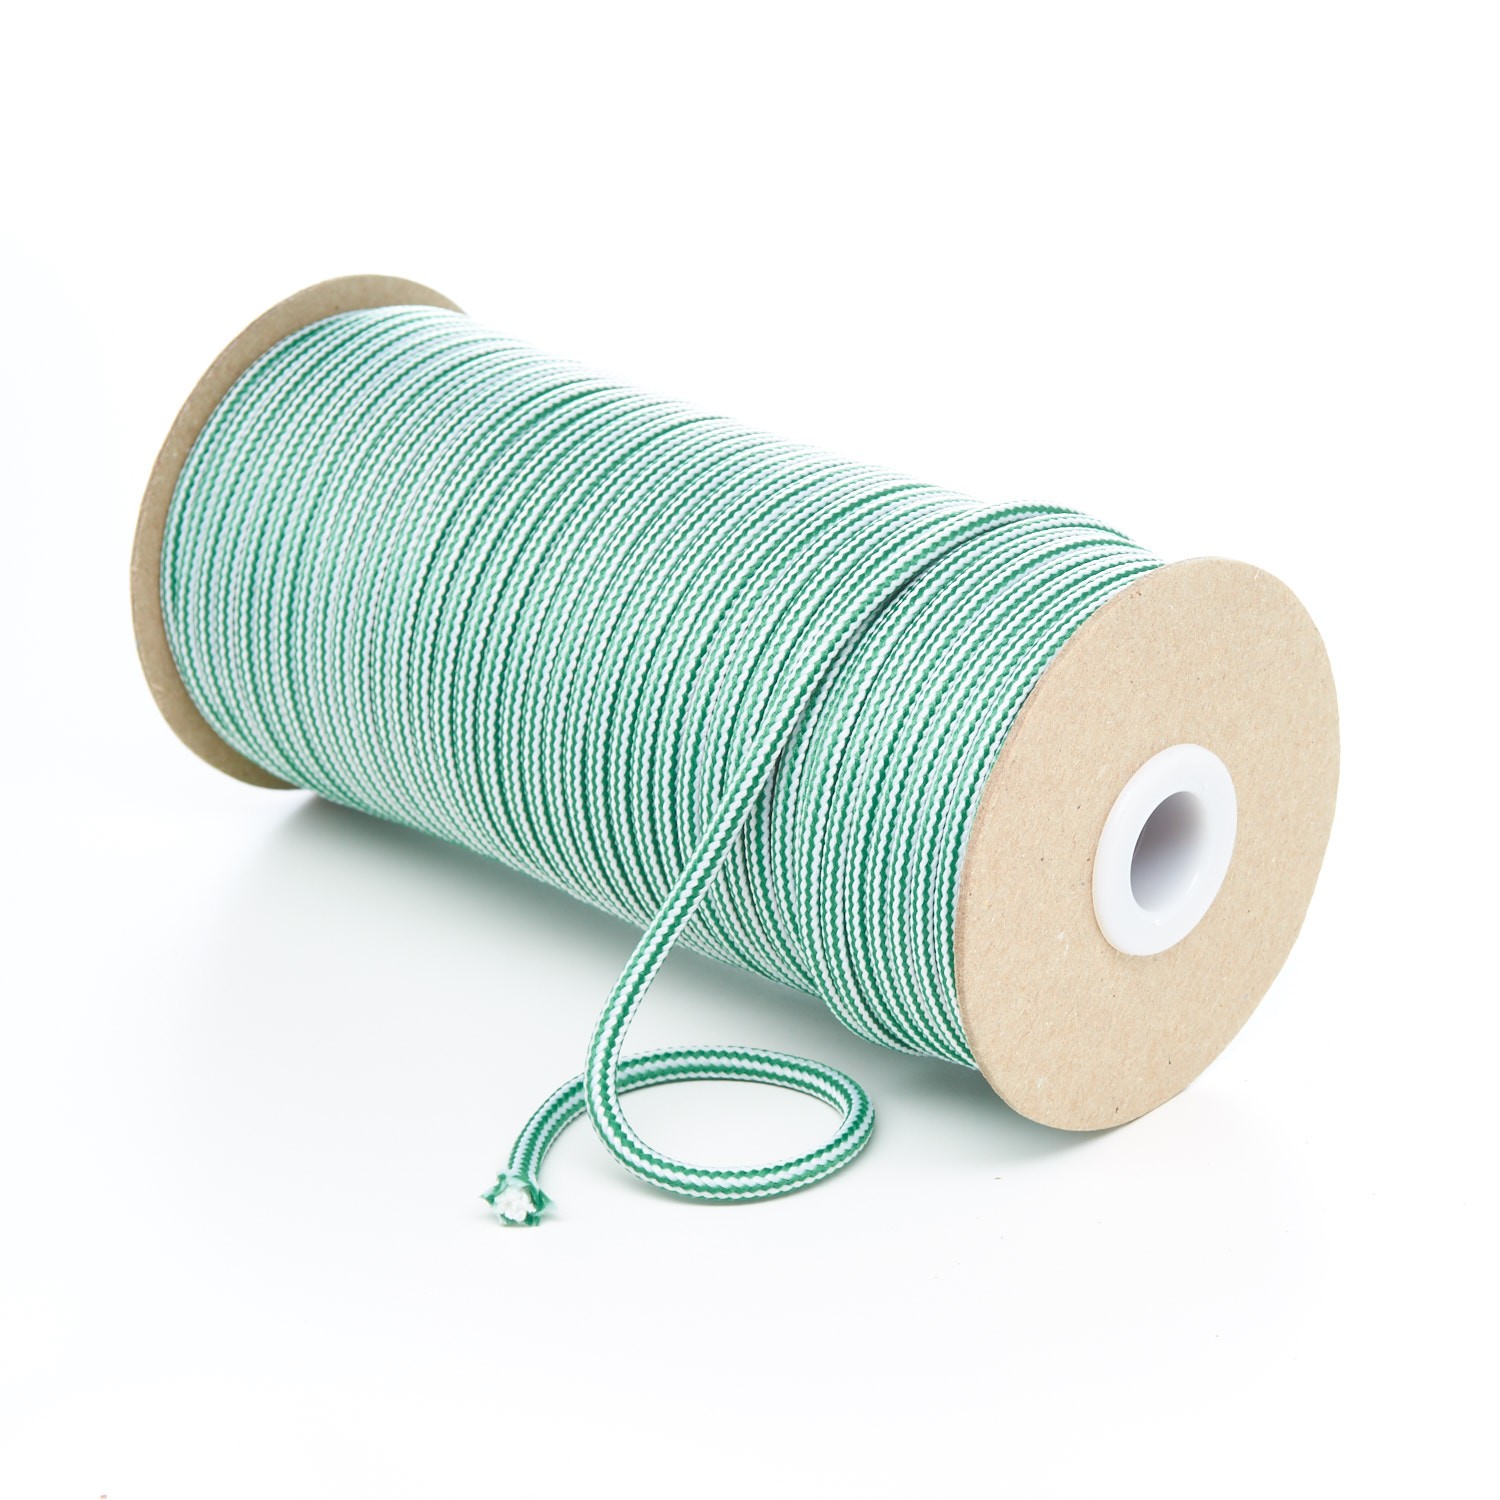 T621 Round Cord Stripes Emerald Green and White Kalsi Cords